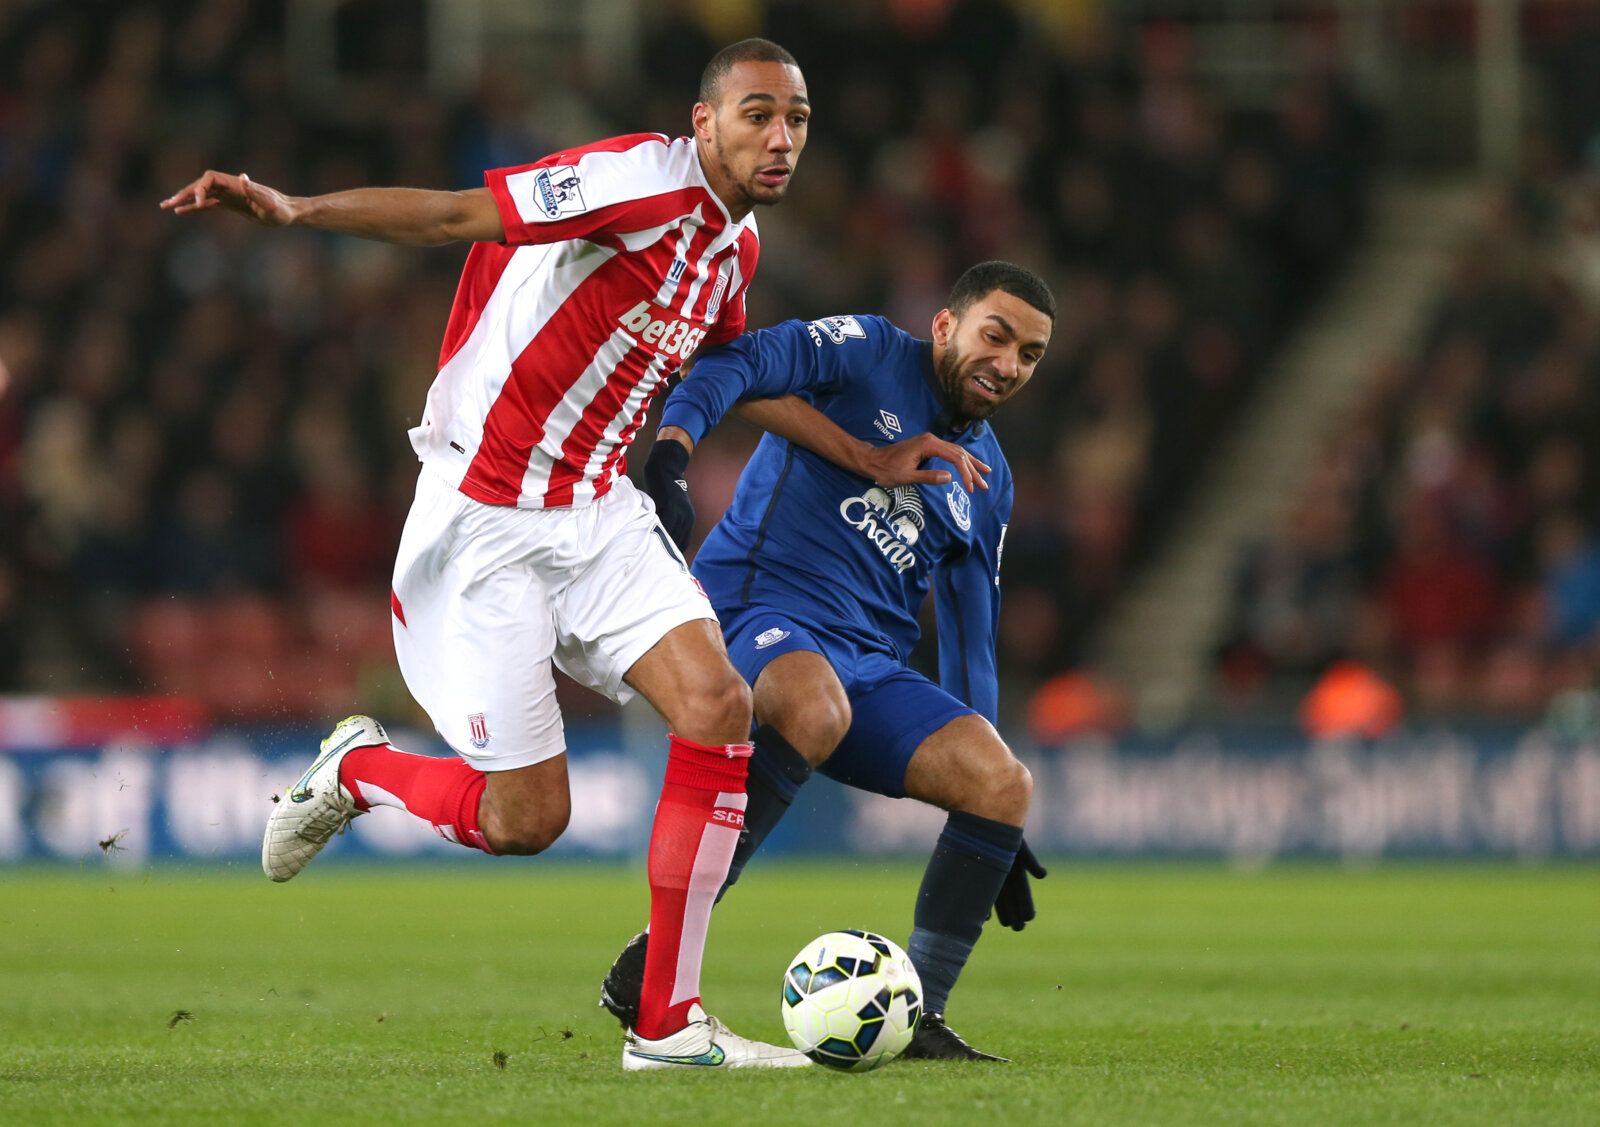 Football - Stoke City v Everton - Barclays Premier League - Britannia Stadium - 4/3/15 
Everton's Aaron Lennon in action with Stoke's Steven Nzonzi  
Action Images via Reuters / Alex Morton 
Livepic 
EDITORIAL USE ONLY. No use with unauthorized audio, video, data, fixture lists, club/league logos or 